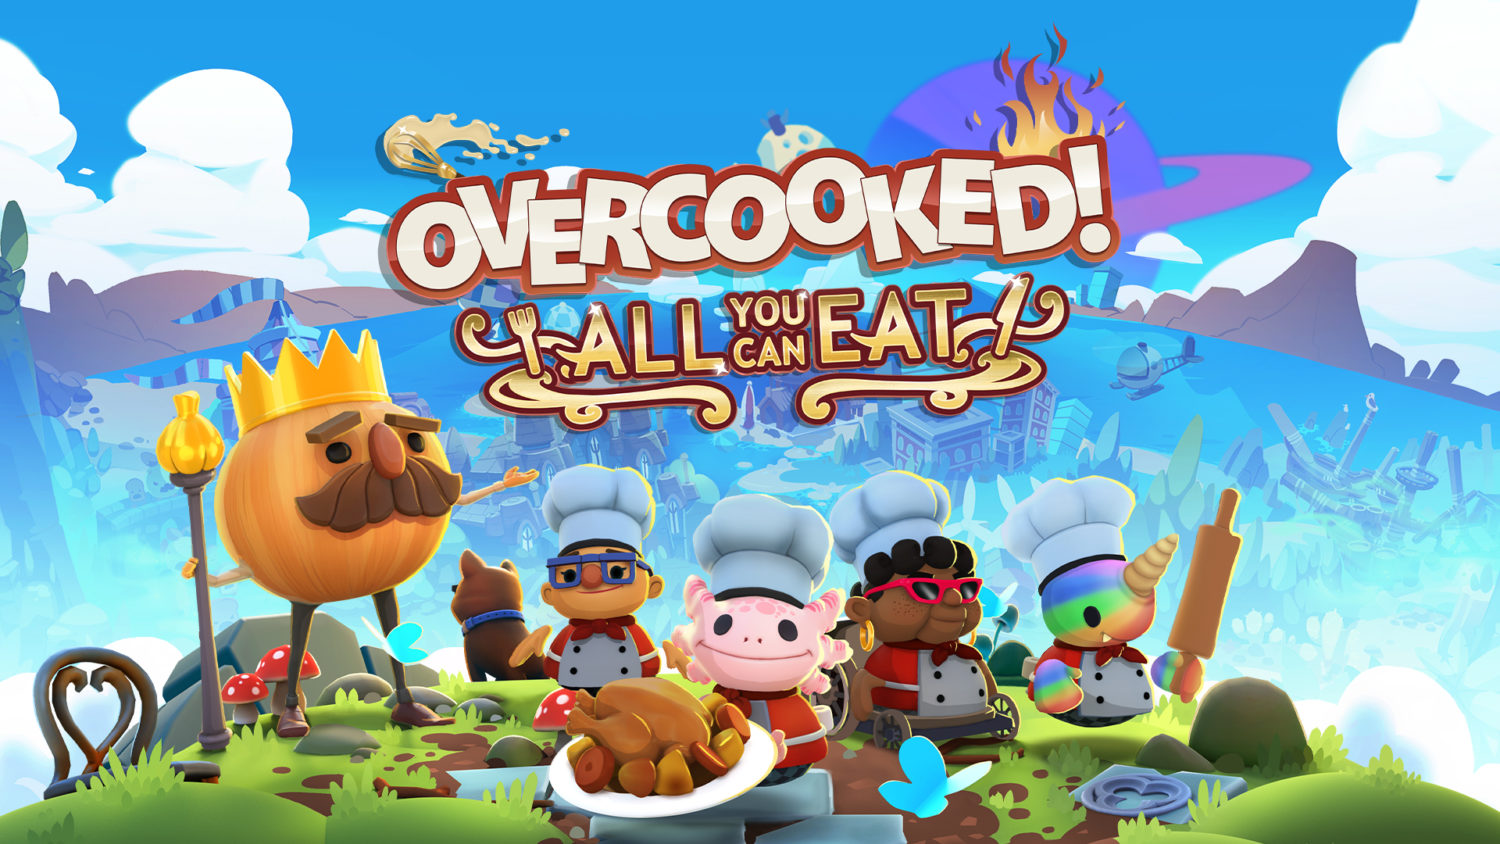 Overcooked - All you can eat - Nintendo Switch eShop